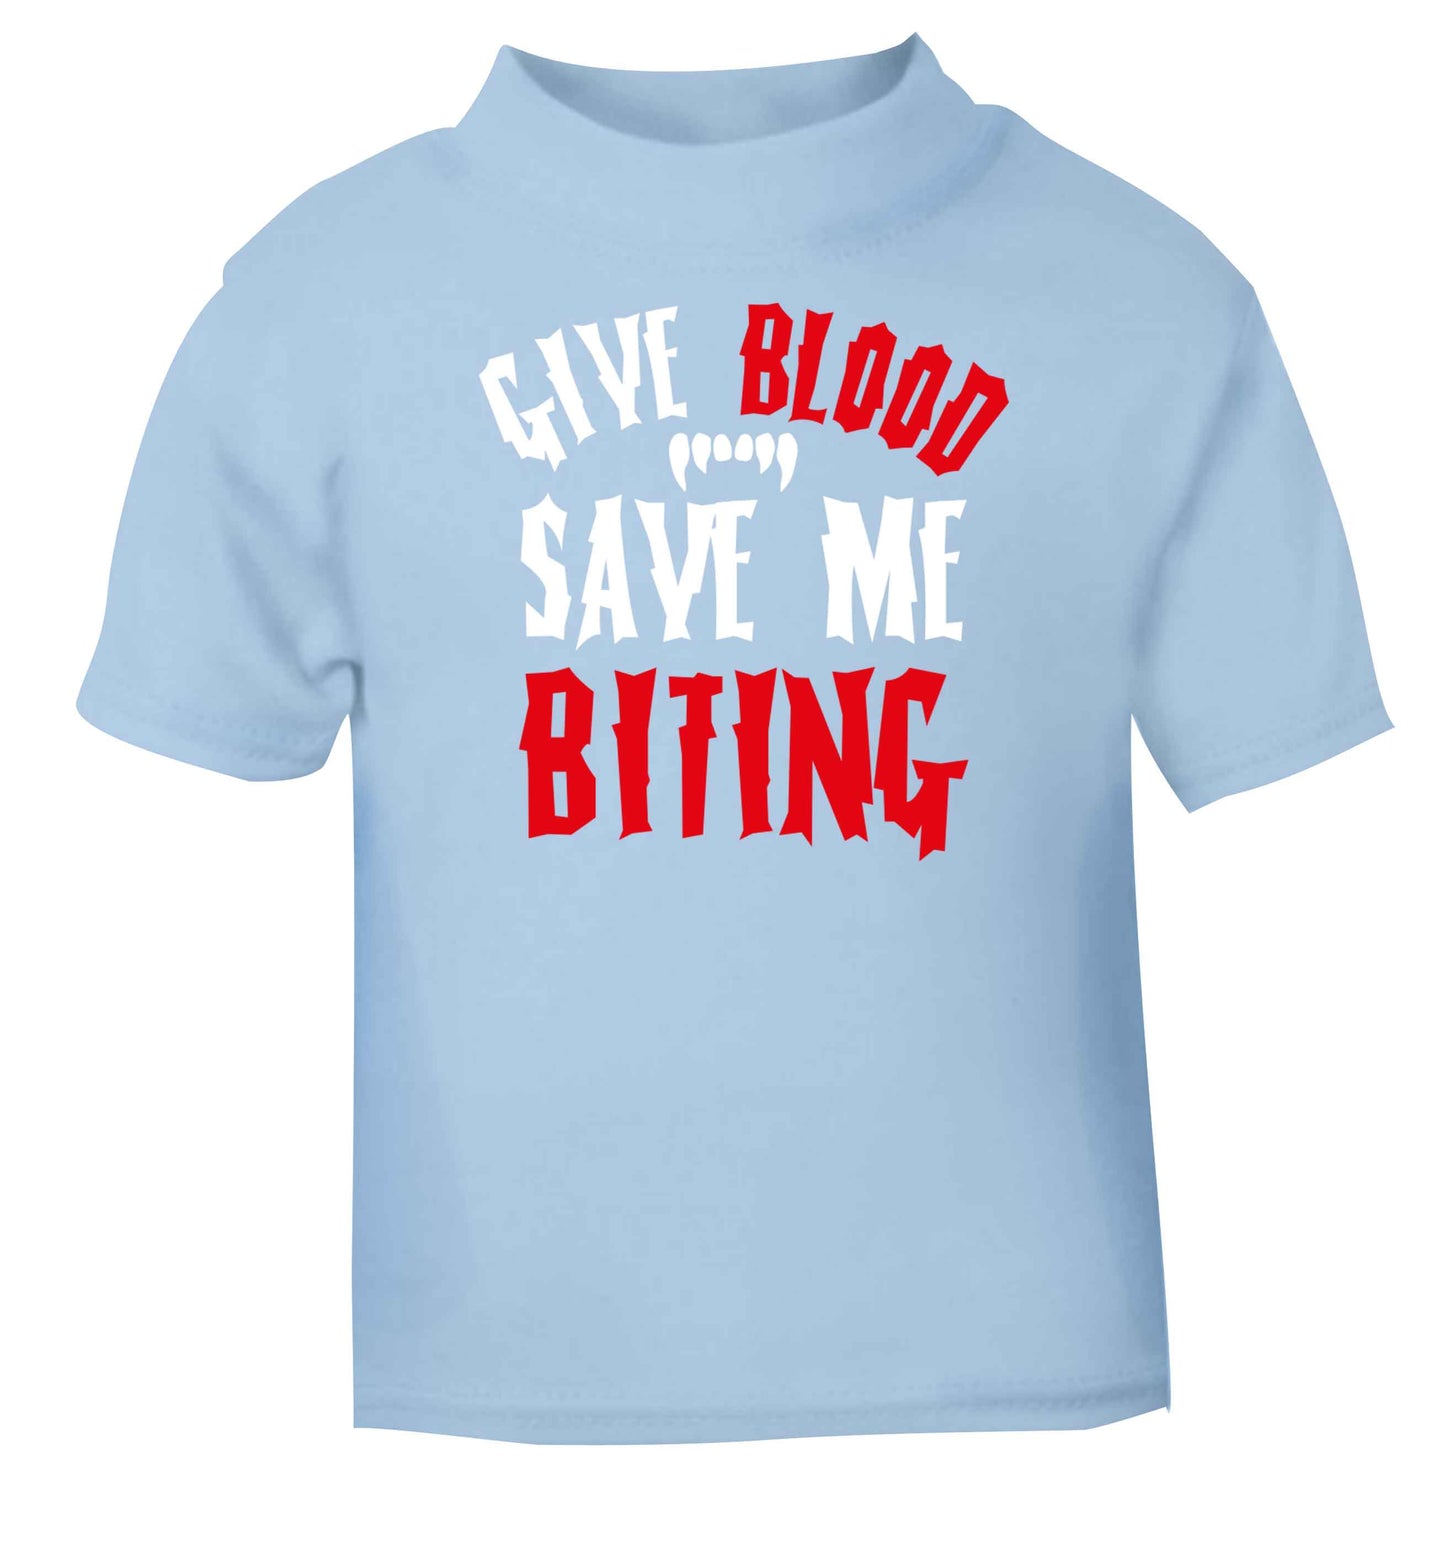 Give blood save me biting light blue baby toddler Tshirt 2 Years